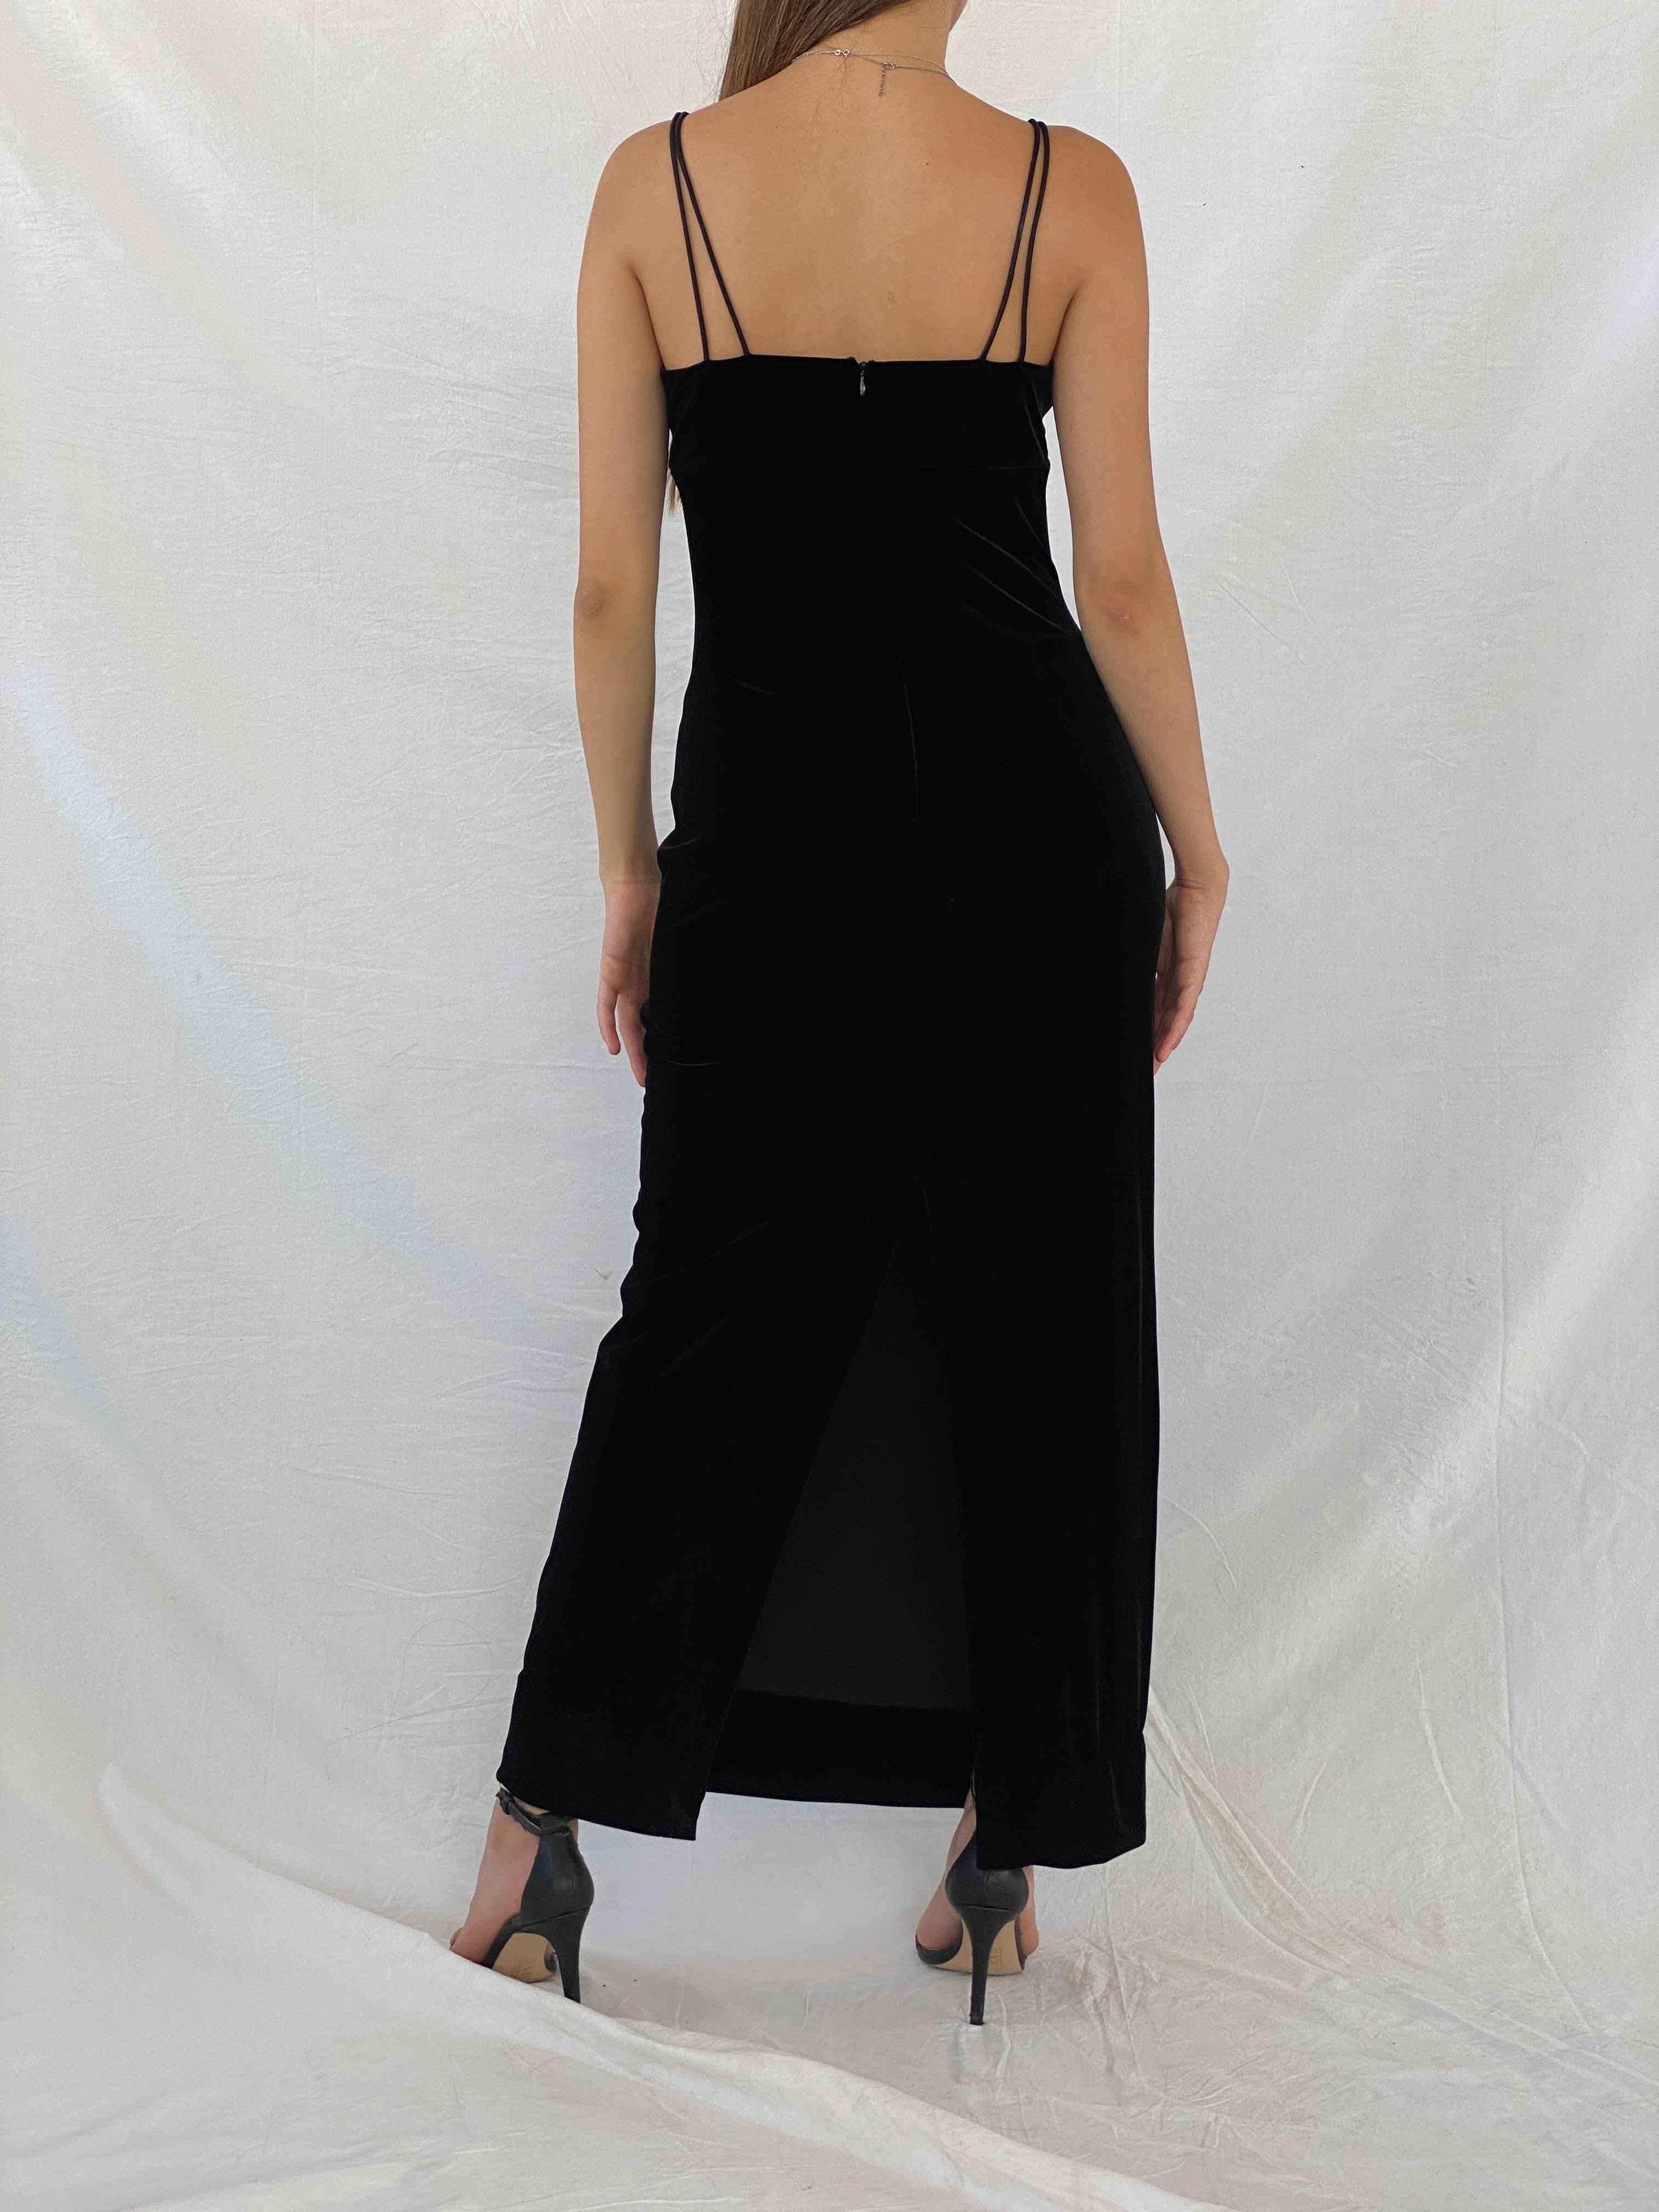 Vintage Morgan and Co. Maxi Velvet Dress - Balagan Vintage Velvet Dress 00s, 90s, dress, maxi dress, Mira, NEW IN